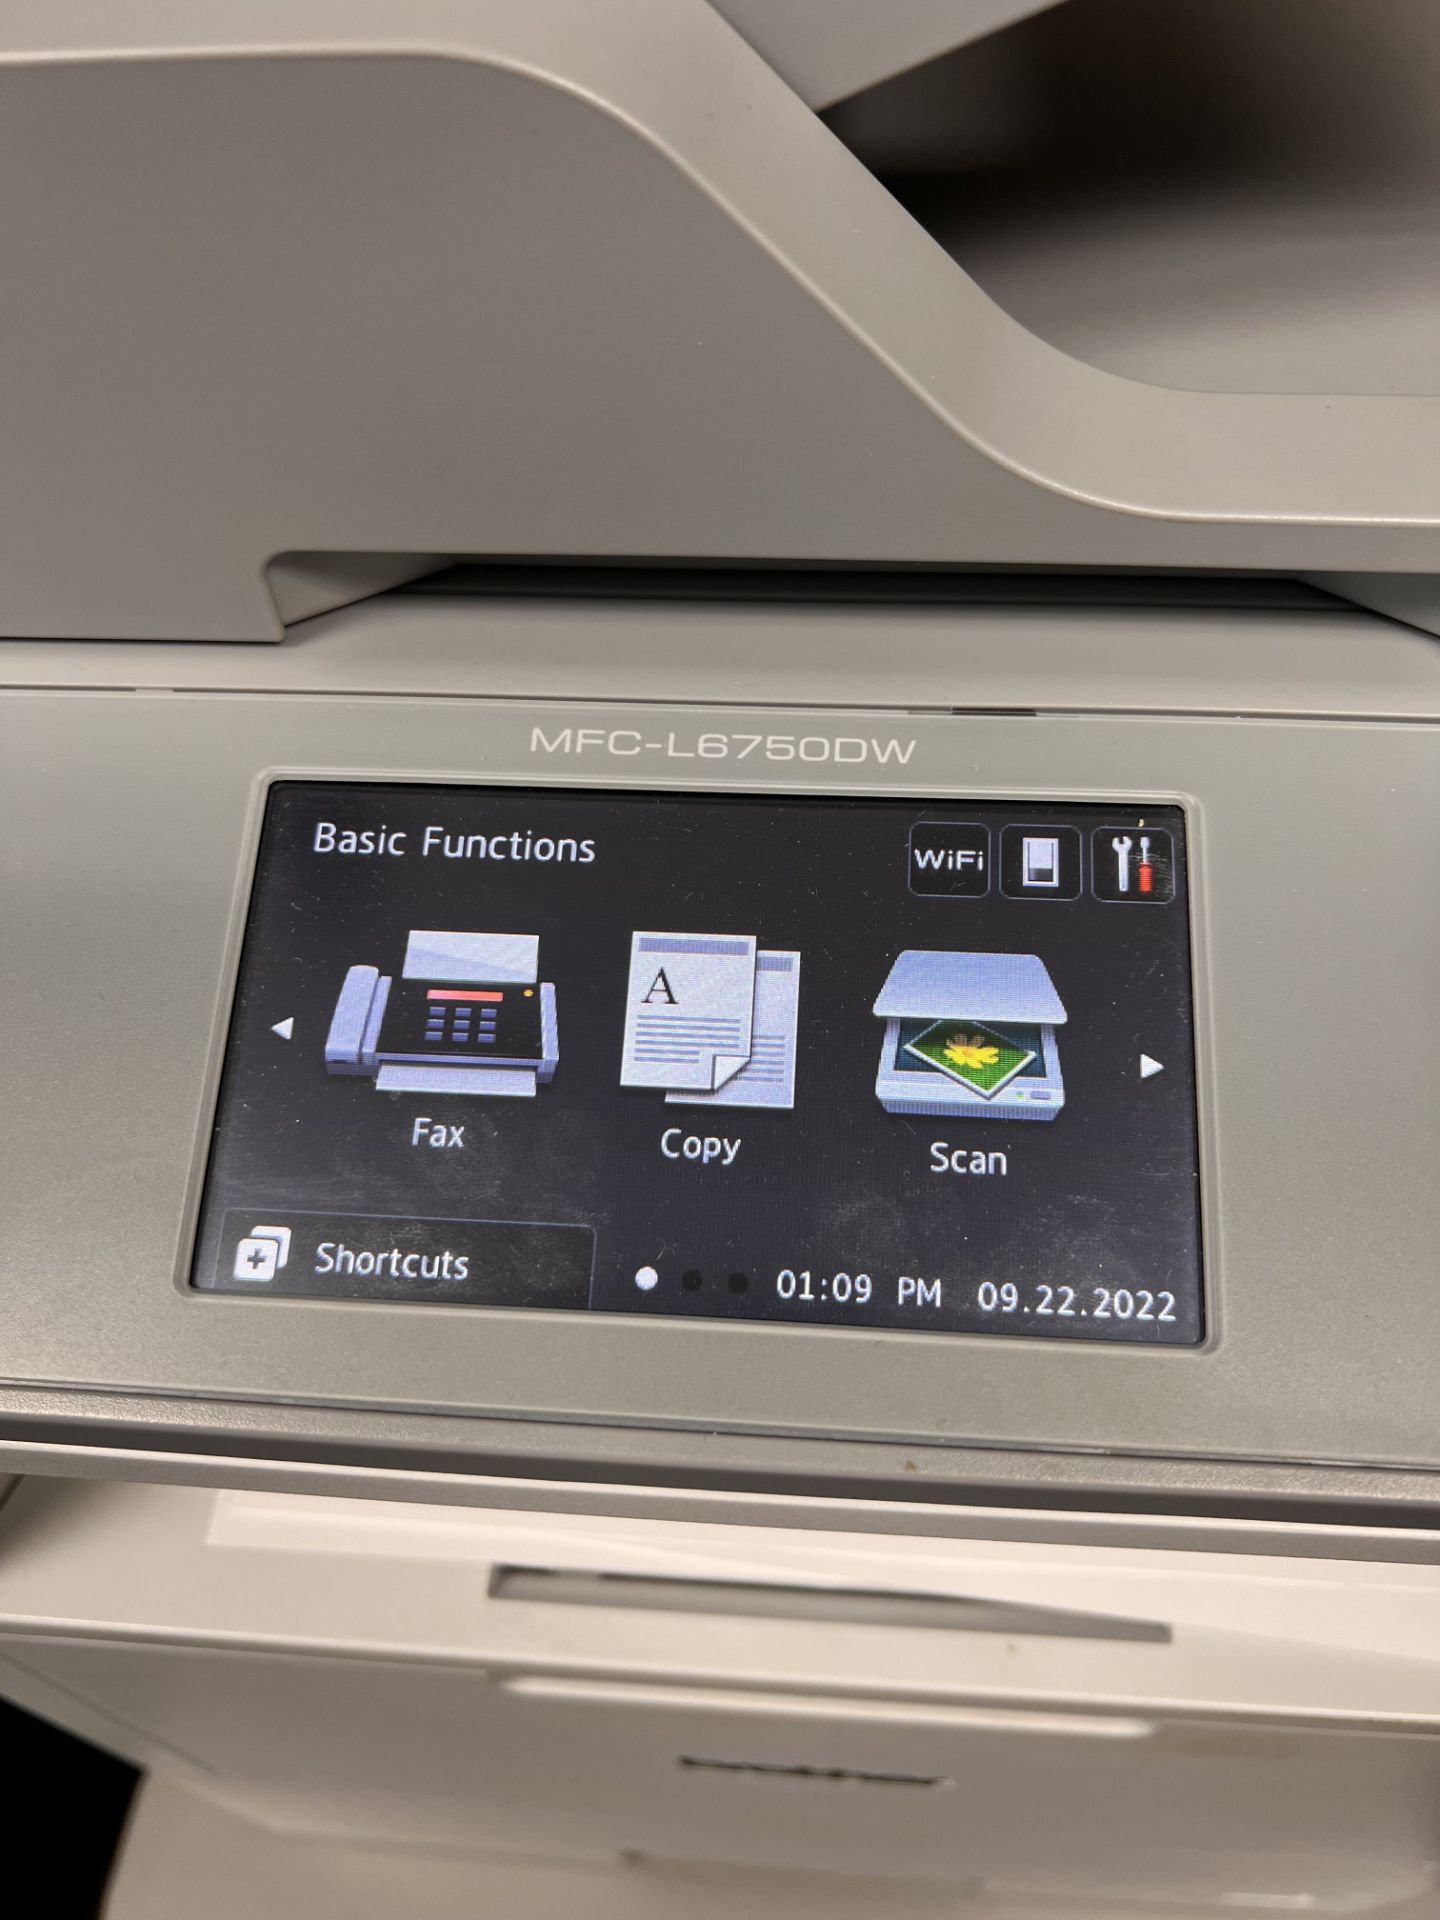 BROTHER MFC-L6750DW COPIER/PRINTER - Image 4 of 5